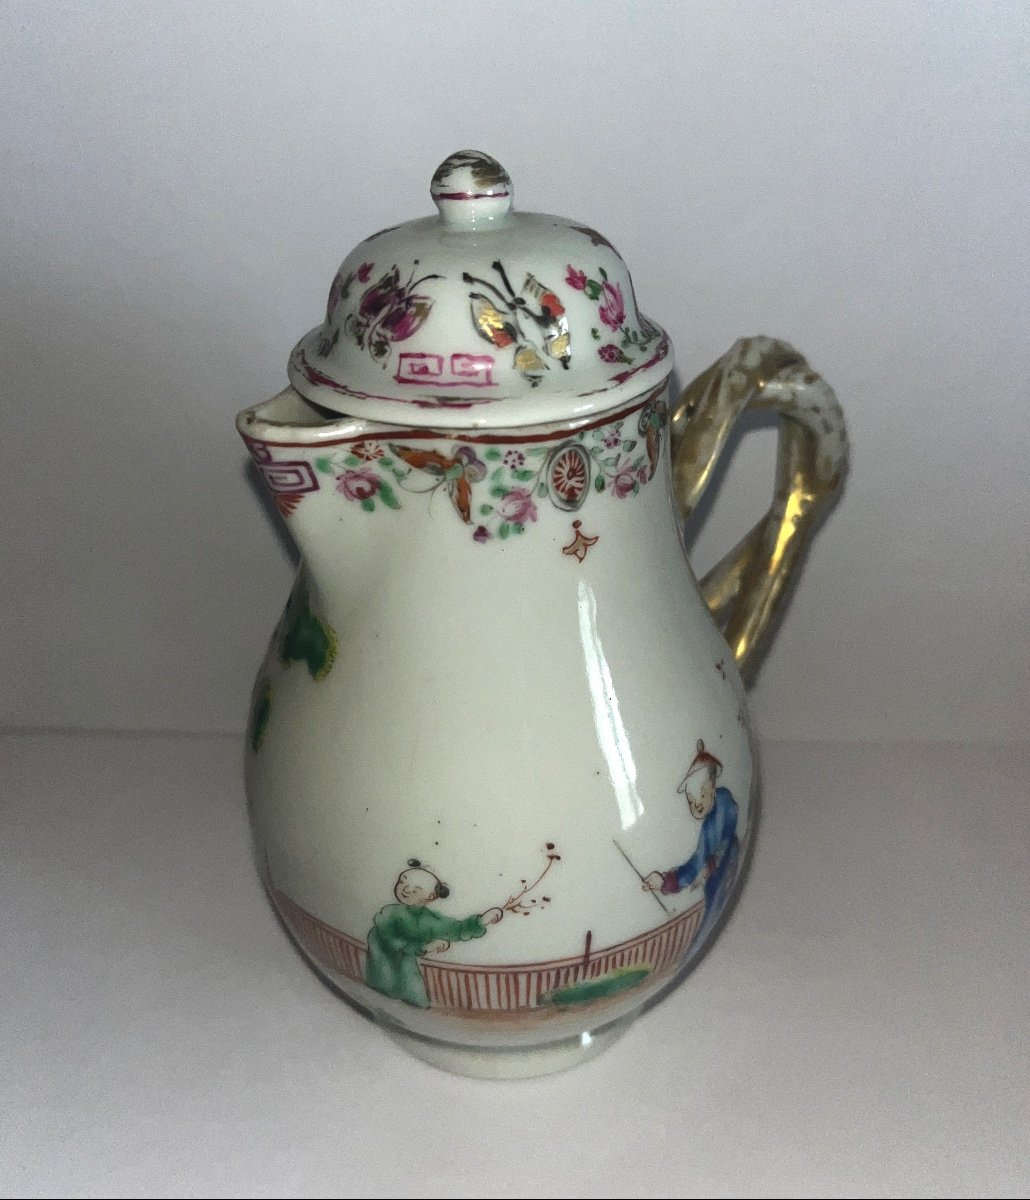 Creamer Compagnie Des Indes  With Chinese Decor From The End Of 17th Century, Beginning Of The 18th Century-photo-2